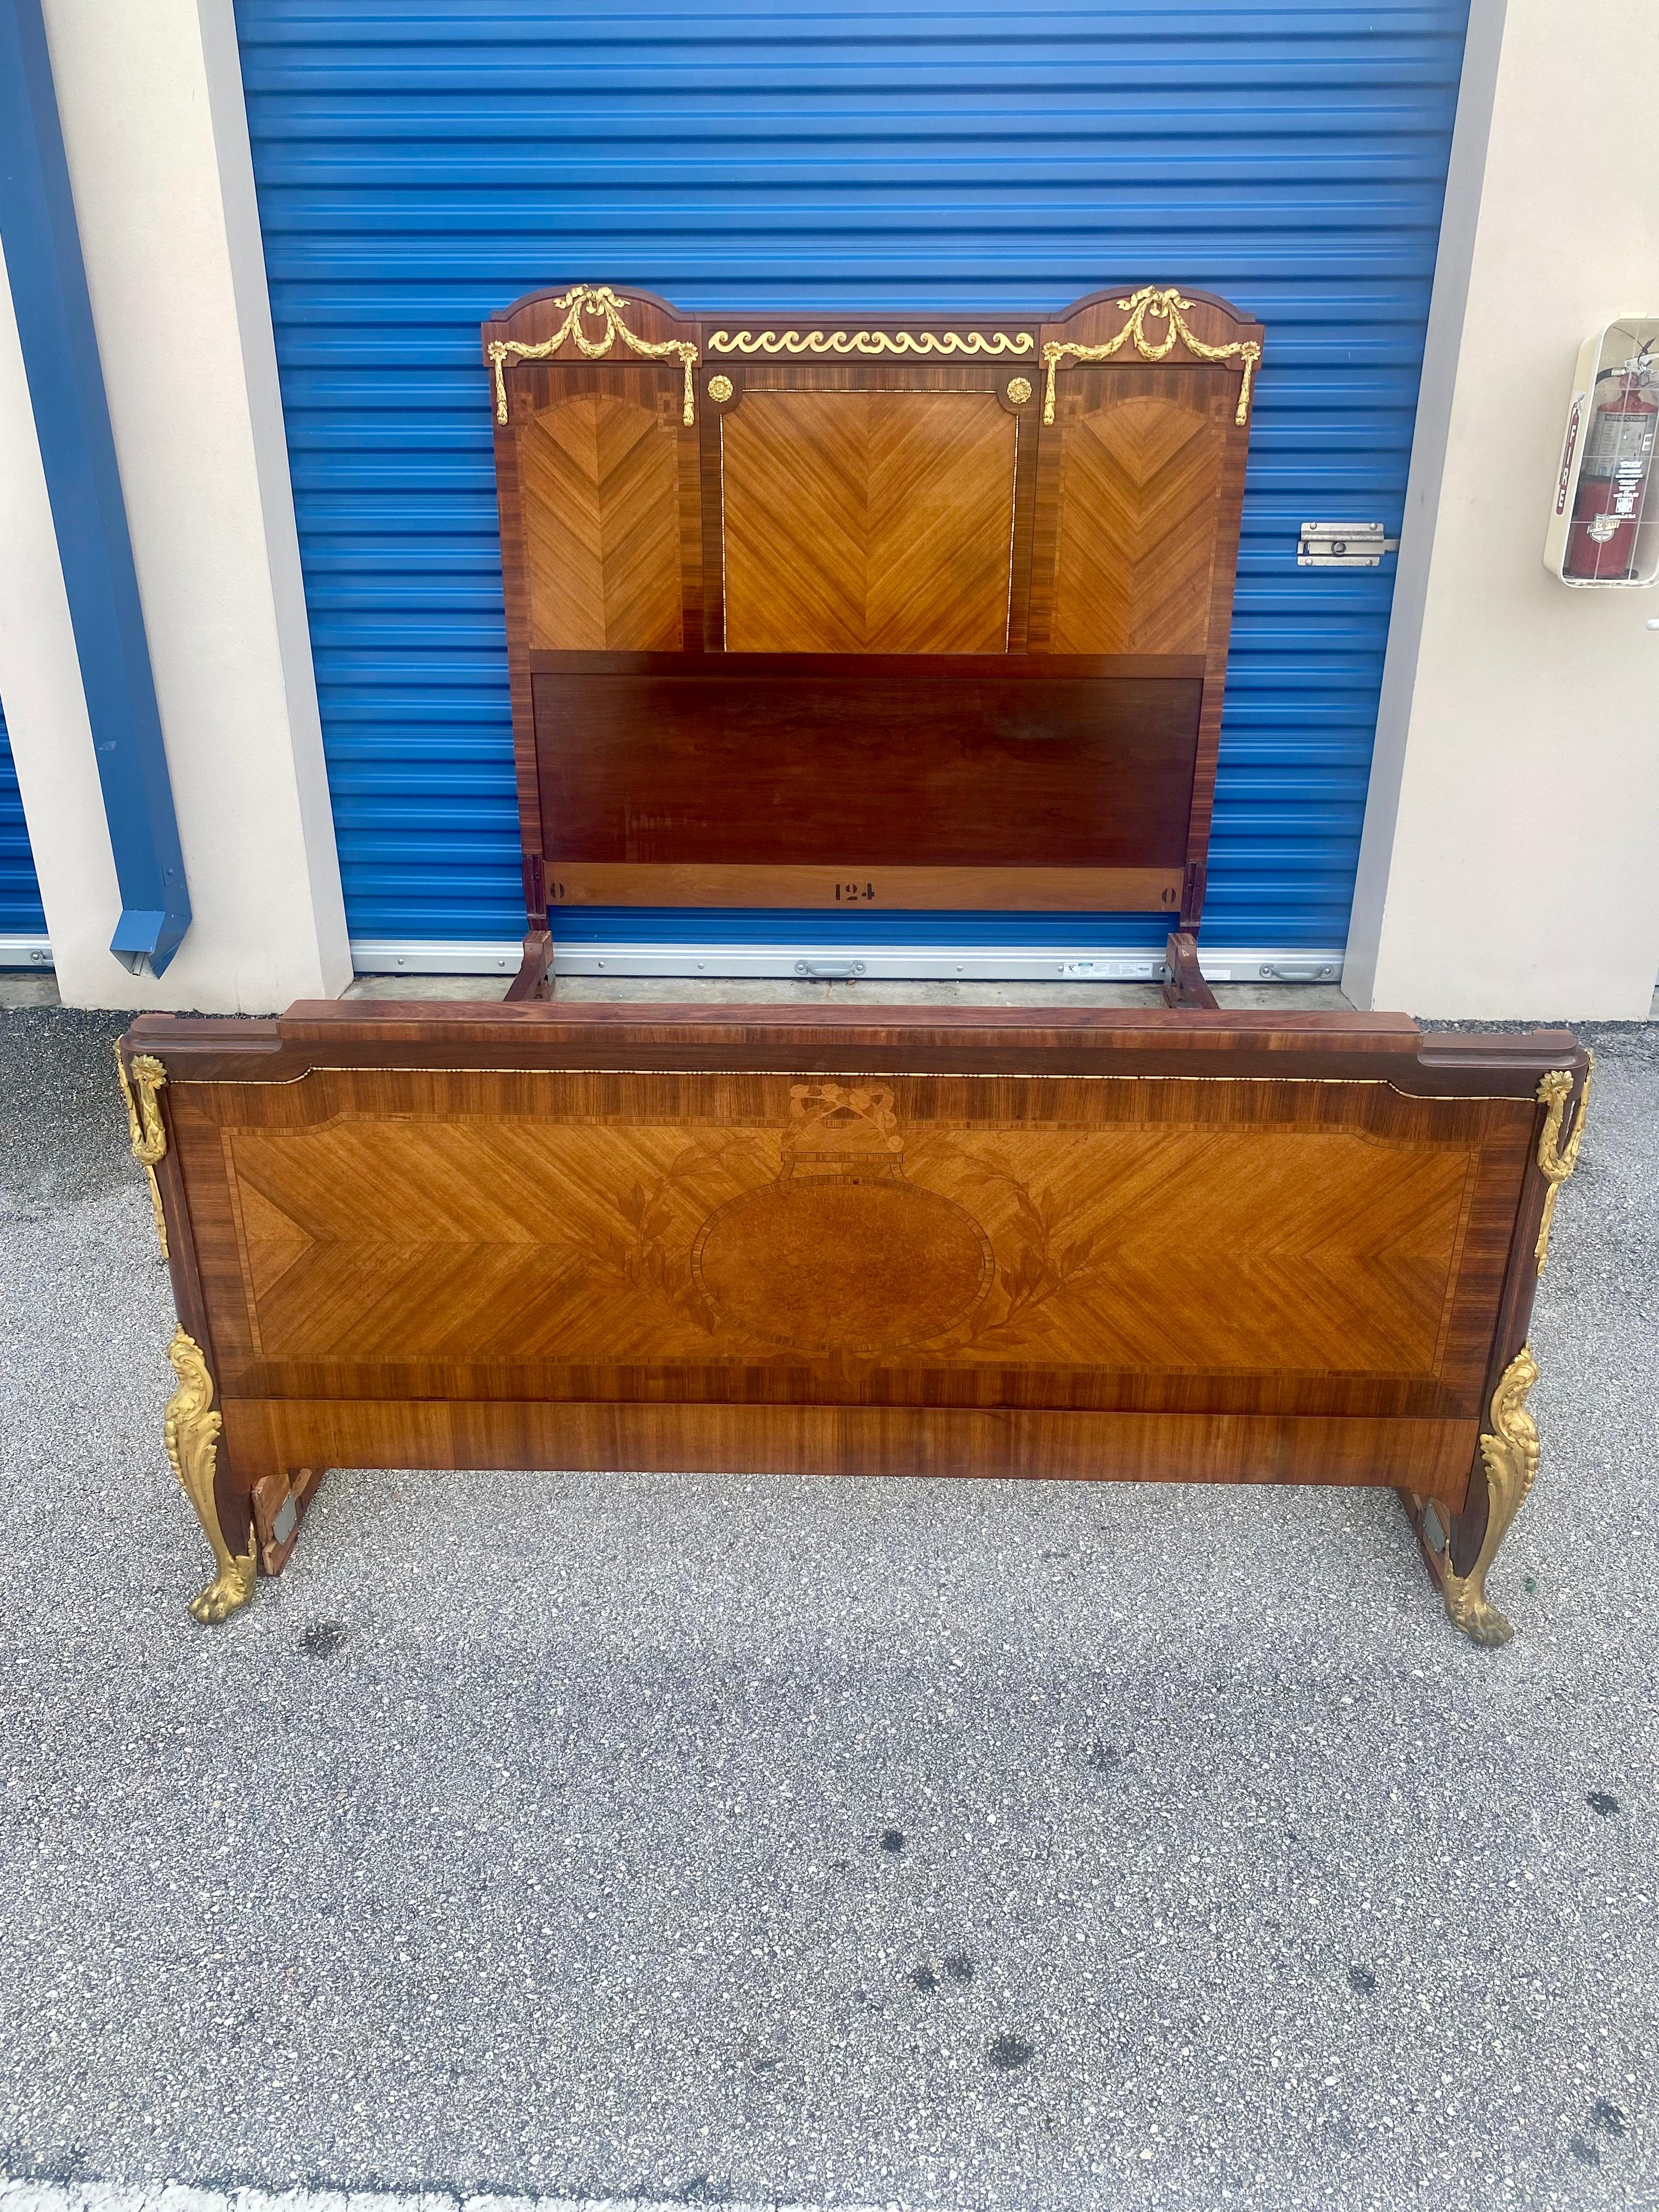 On offer on this occasion is one of the most stunning, bed frame you could hope to find. This is an ultra-rare opportunity to acquire what is, unequivocally, the best of the best, it being a most spectacular and beautifully-presented bed.